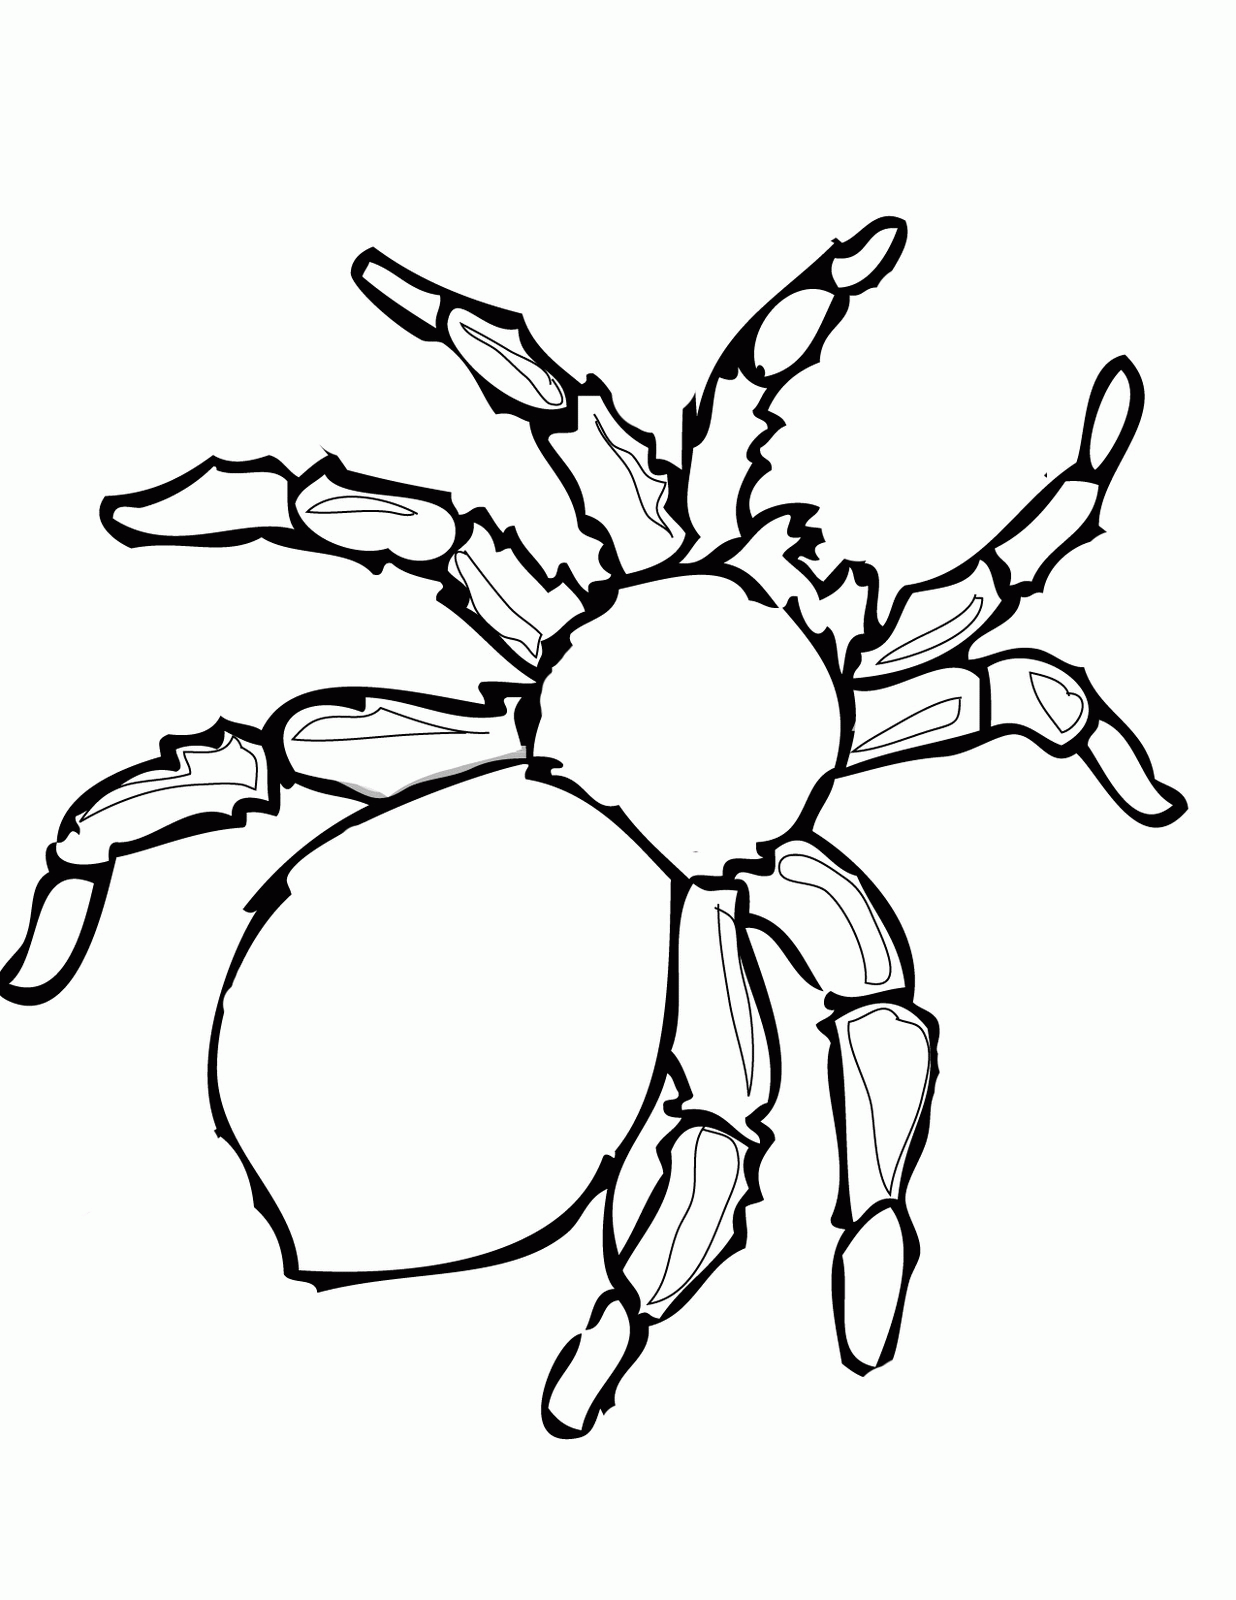 Anansi The Spider Coloring Page Coloring Home